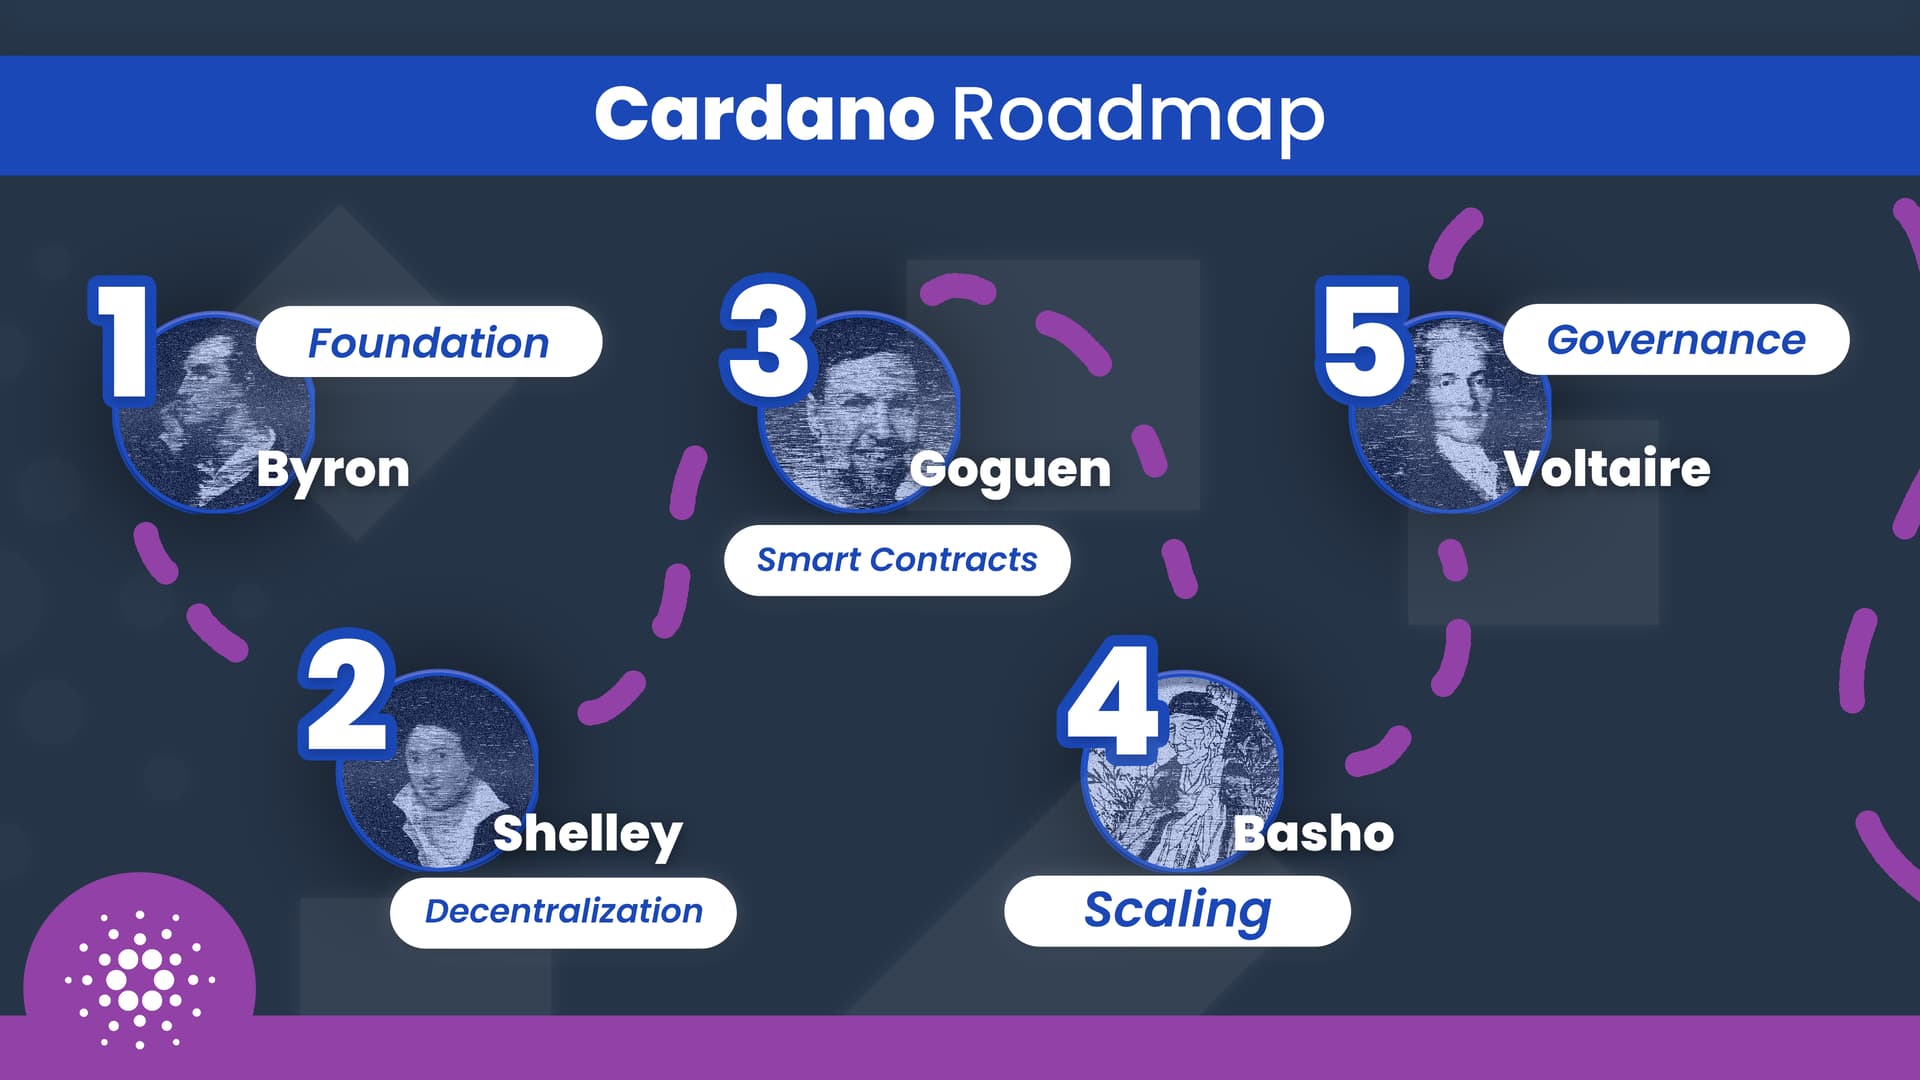 What IOG has delivered for Cardano. Shelley: decentralizing the blockchain | Essential Cardano